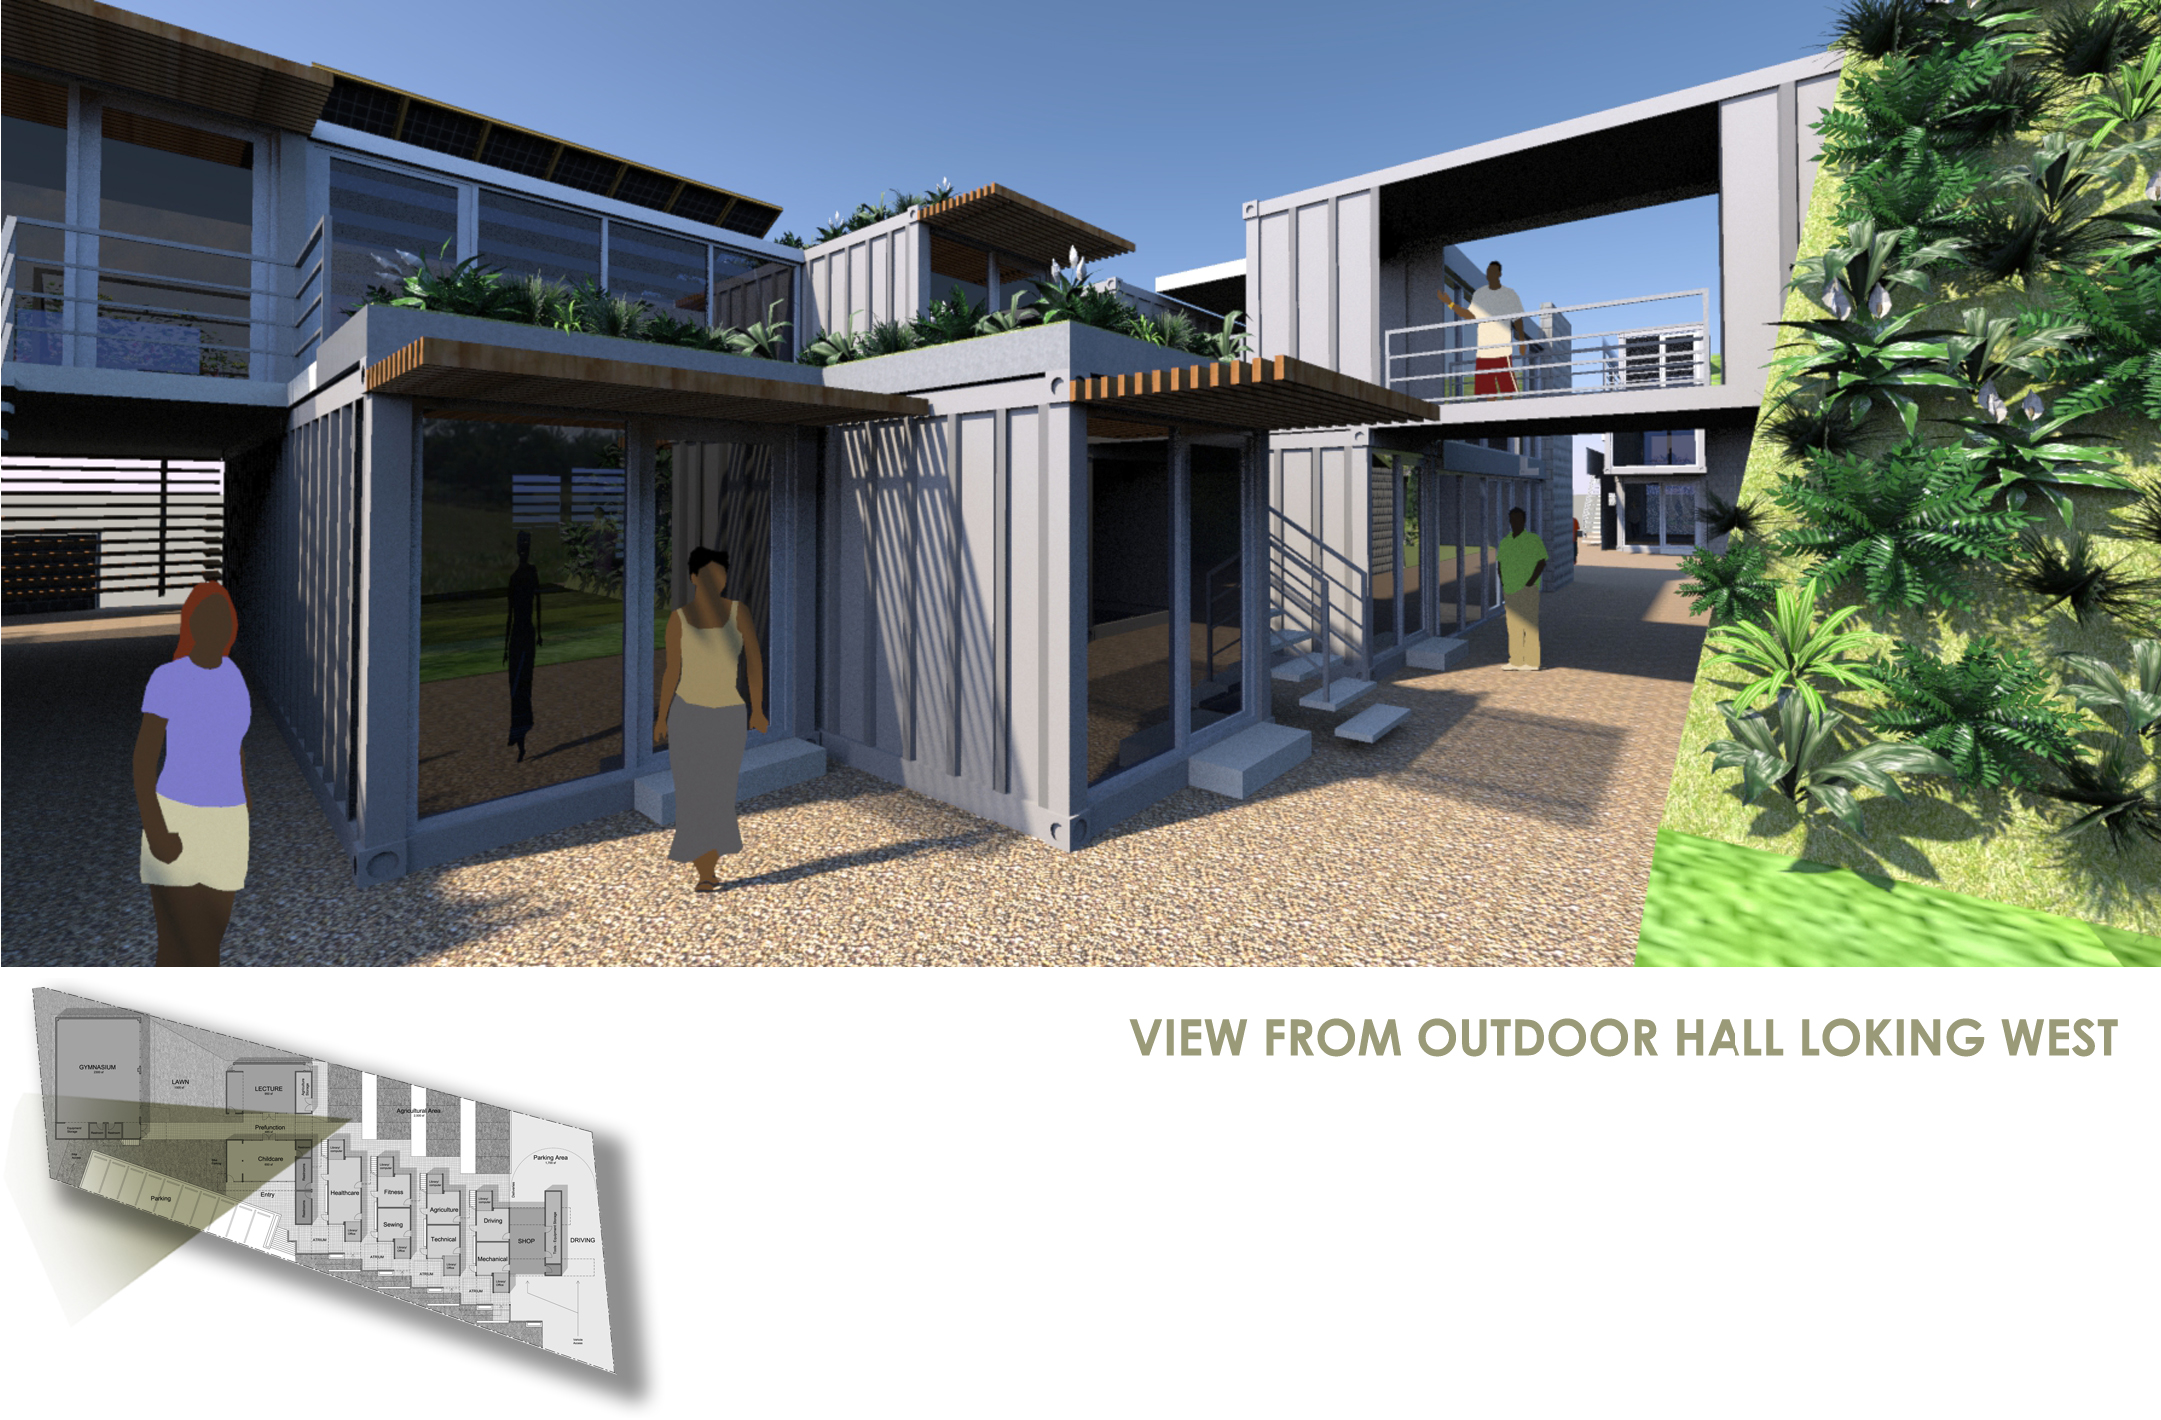 Paolo_Volpis_Architect_Nigeria_Asaba_container _building_school_children_development_center_sustainable_energy_solar_green_roof_geothermal_recycled_material_rain_water_collector_education_design (1 (1